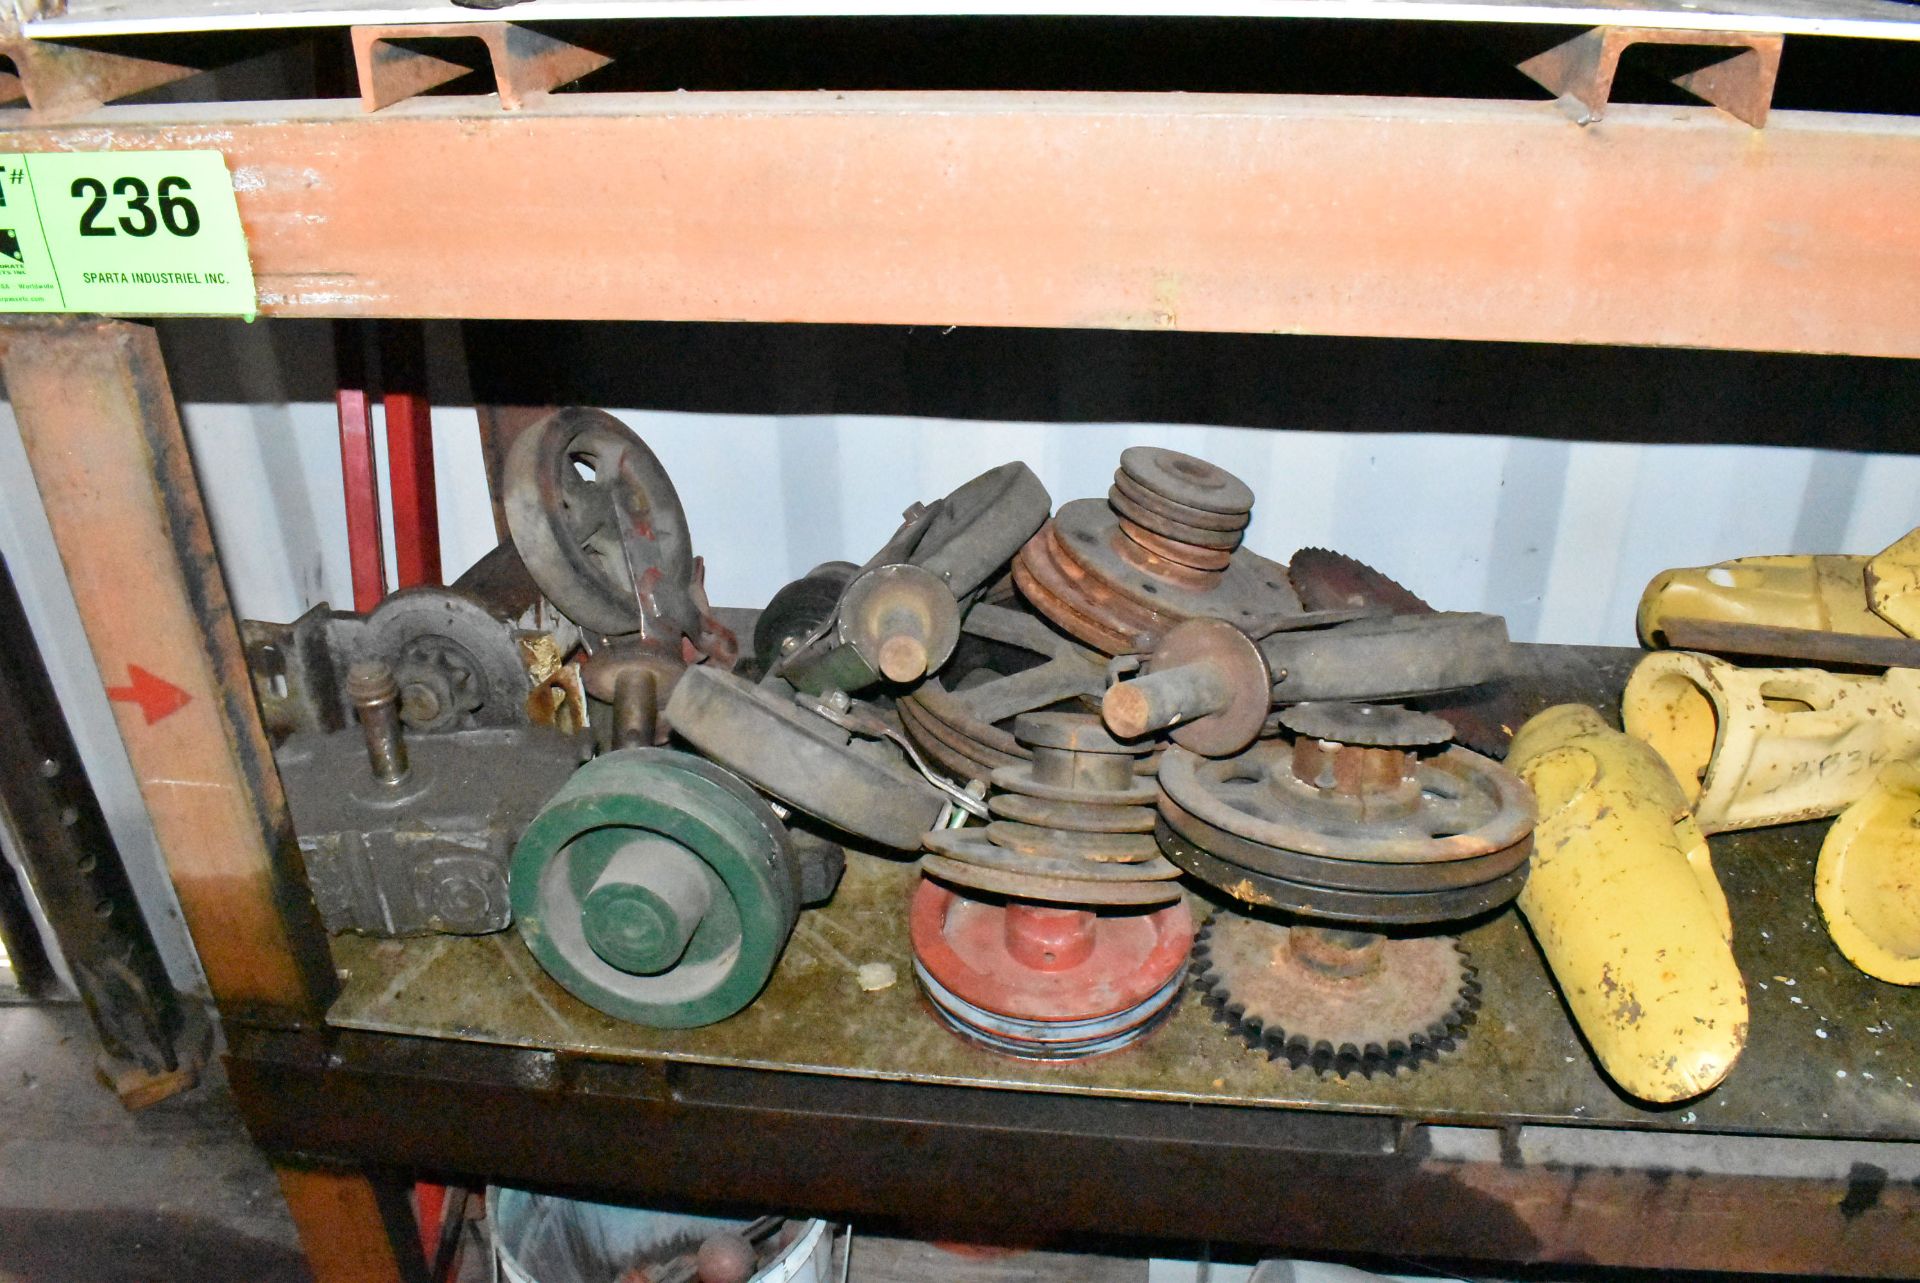 LOT/ REMAINING CONTENTS OF CONTAINER CONSISTING OF SPARE PARTS, FLY WHEELS, WIRE, ROLLERS AND BUCKET - Image 6 of 8